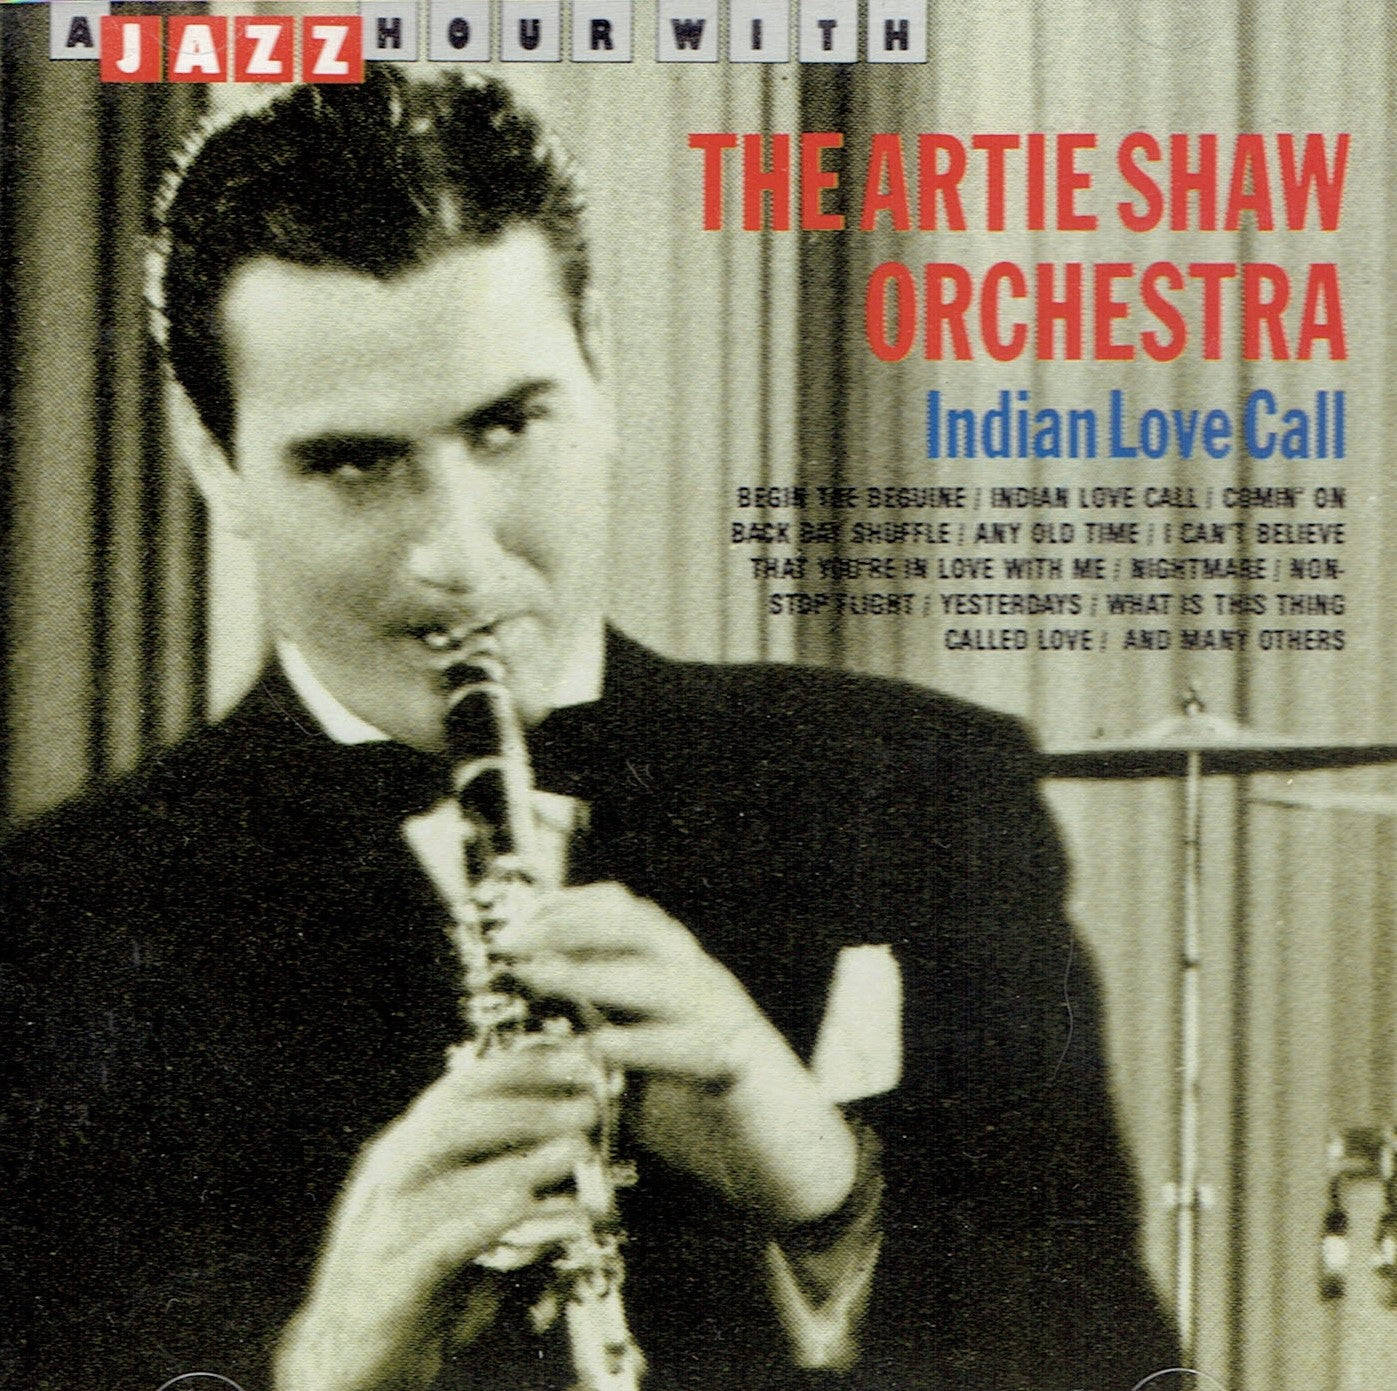 Dasartie Shaw Orchestra Indian Love Call Cover Wallpaper